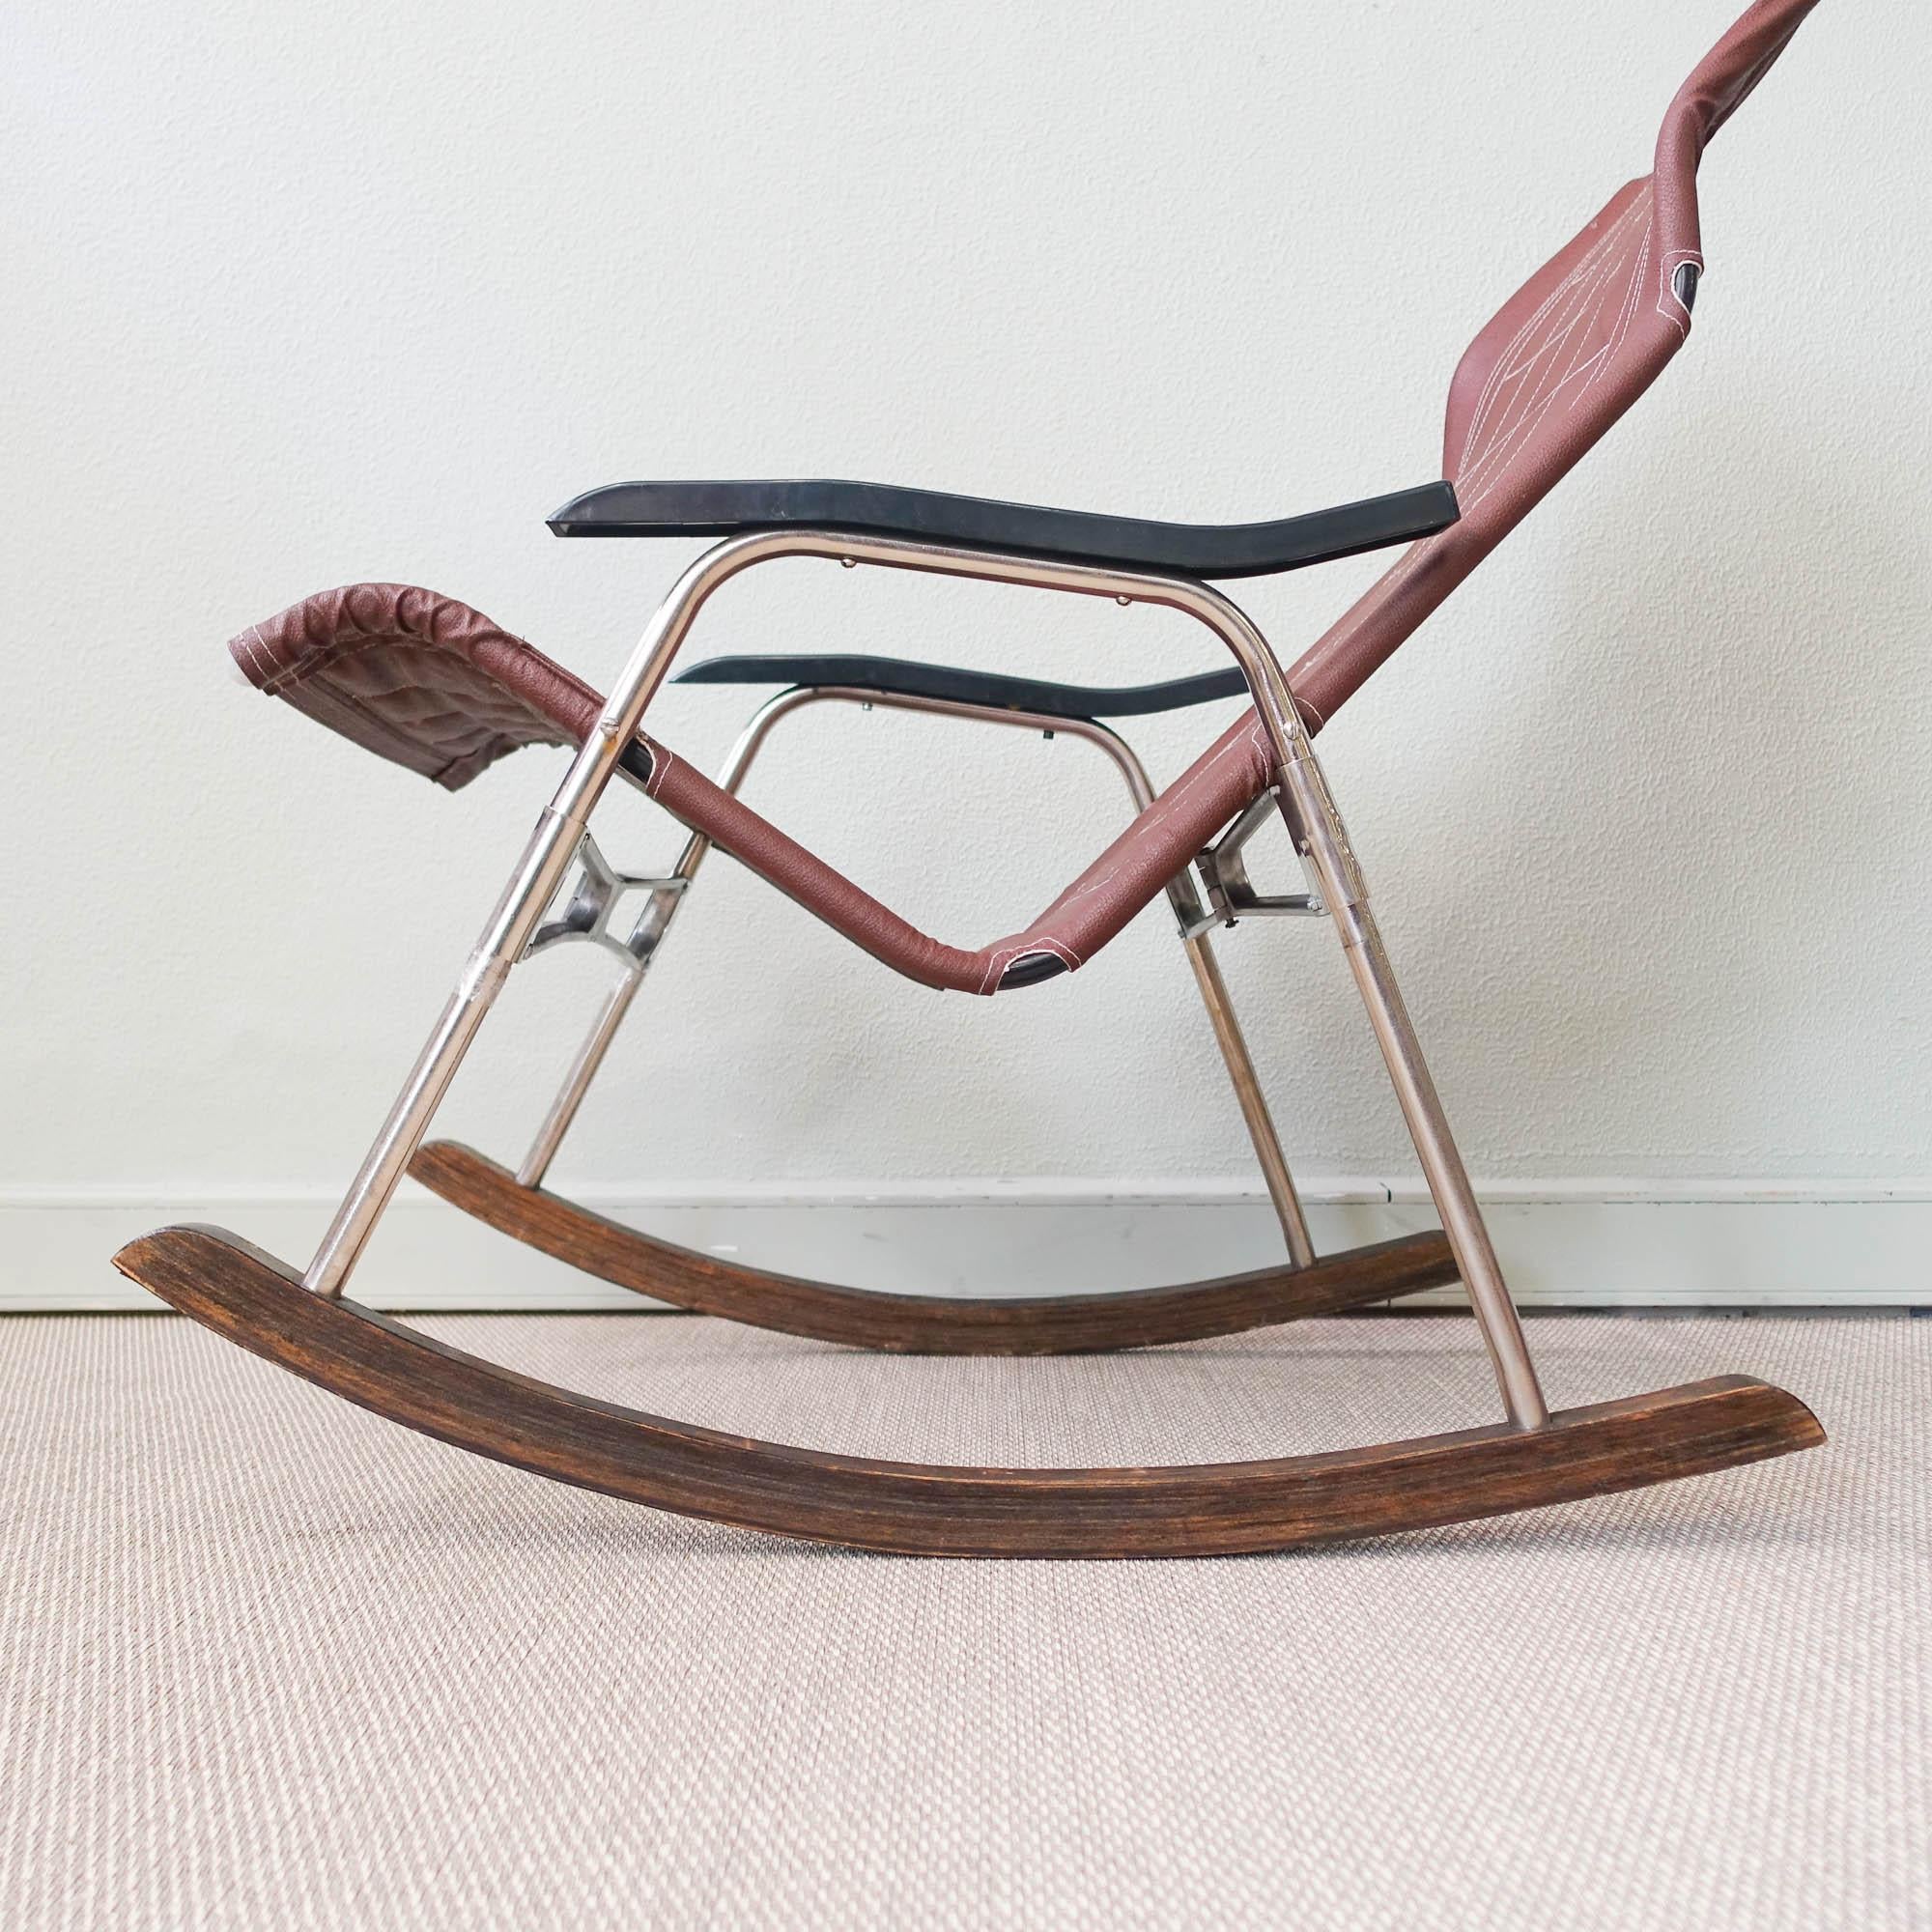 Mid-20th Century Japanese Foldable Rocking Chair by Takeshi Nii, 1950's For Sale